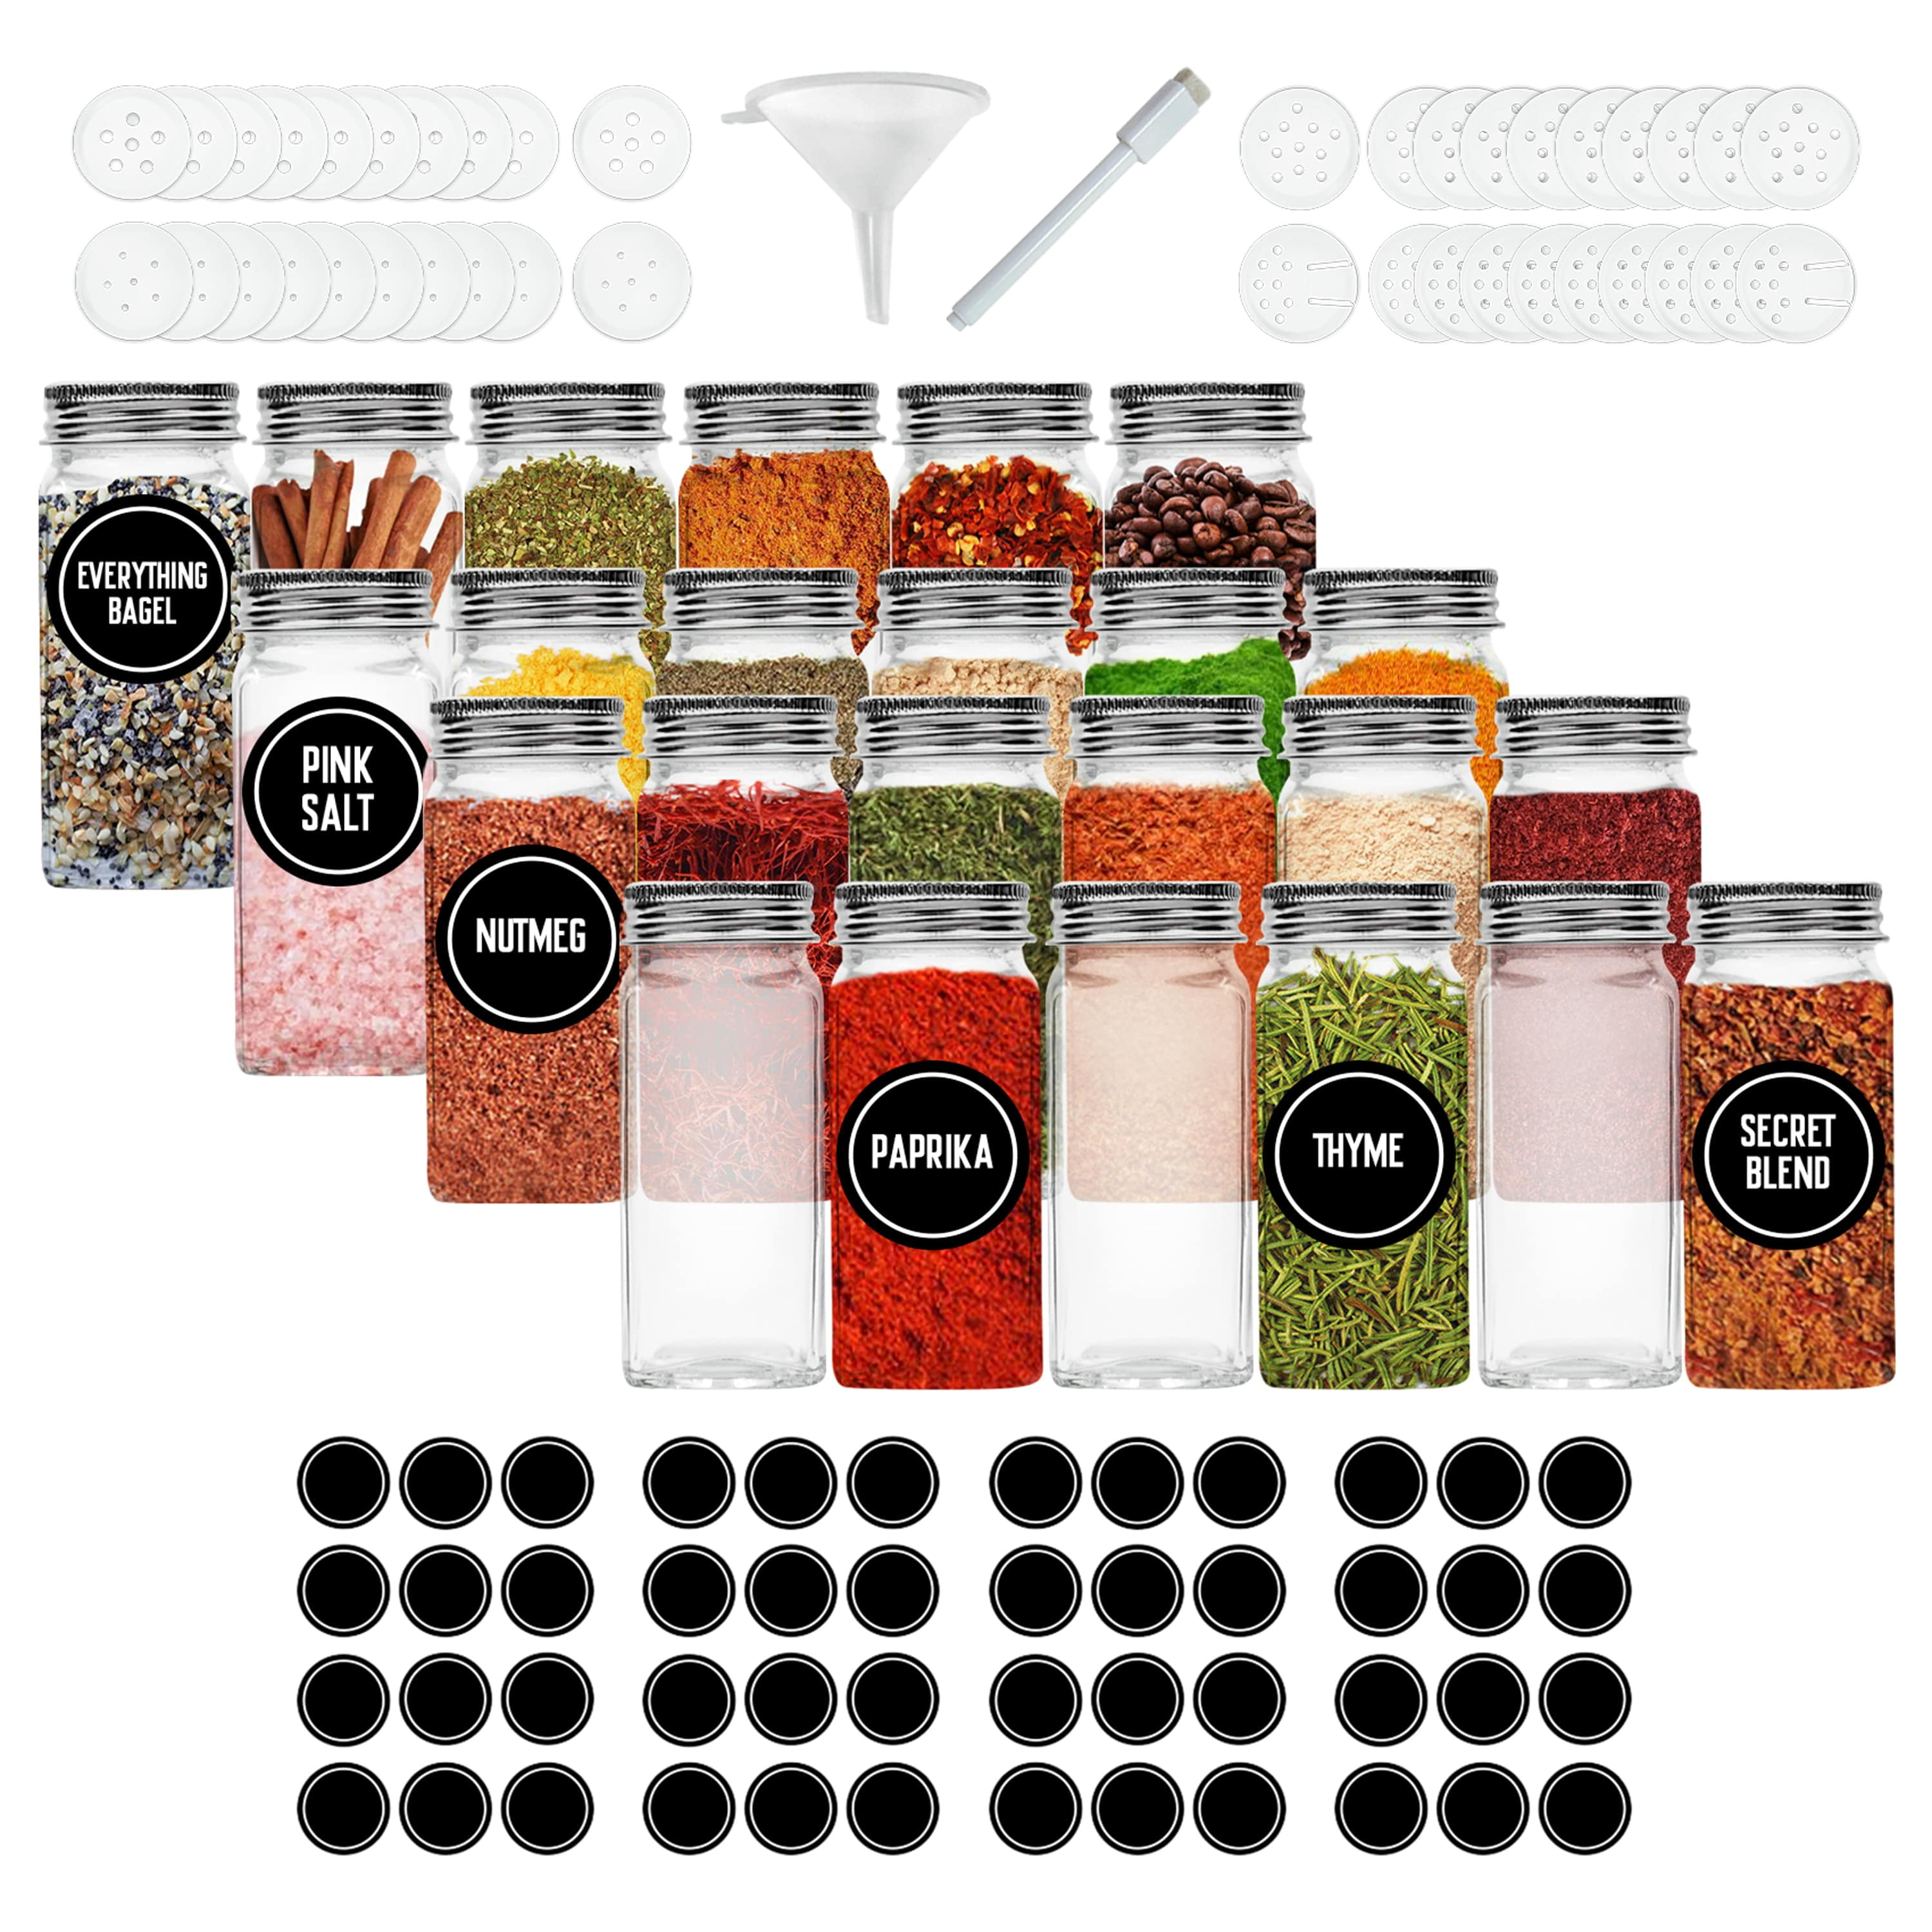  Aliggbent Spice Jars with Lable, 48 Pcs 4 oz Glass